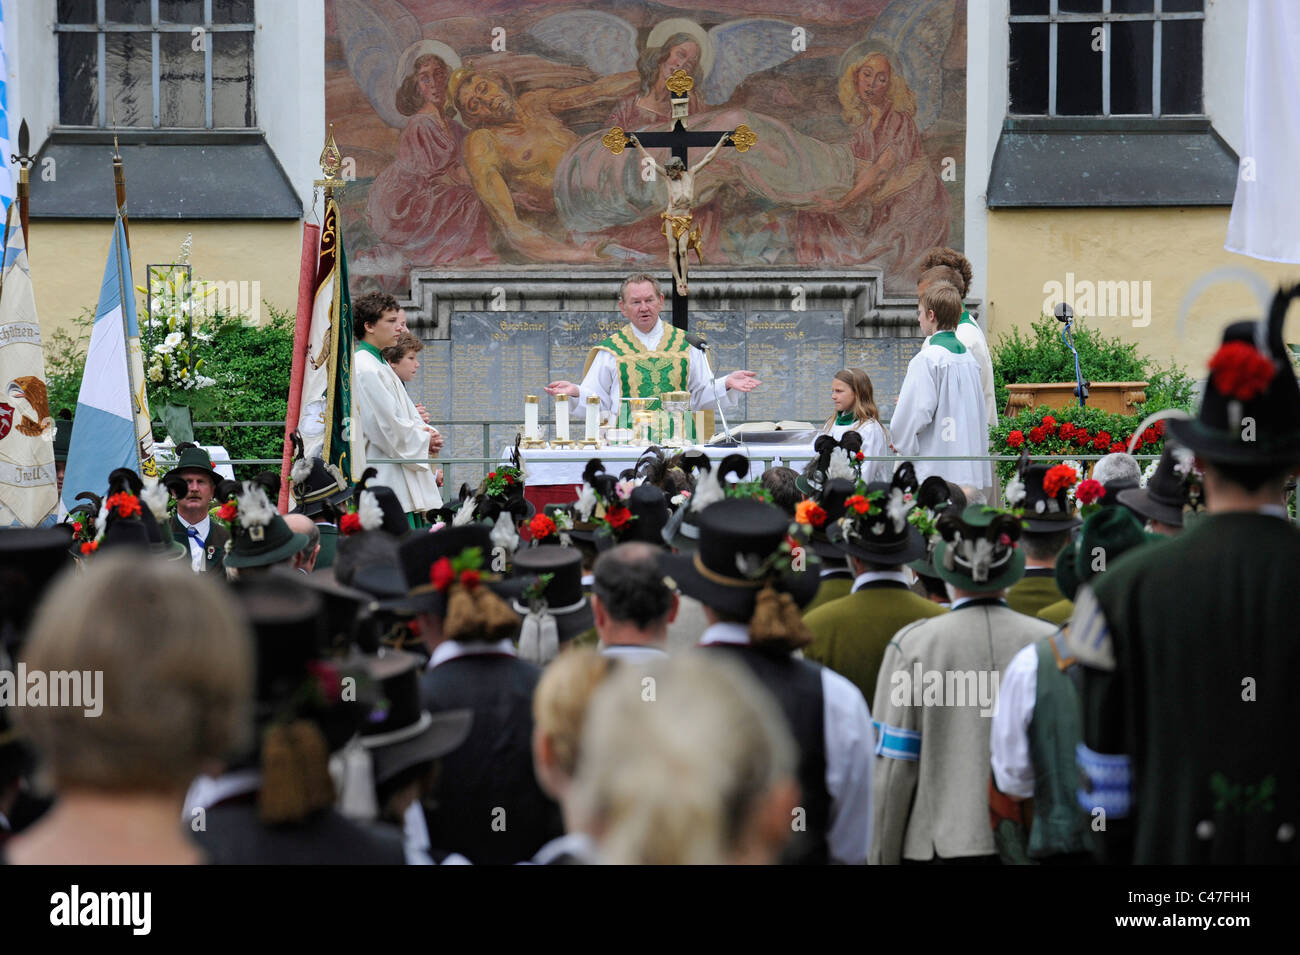 outdoor catholic mass on city place in Neubeuern, Bavaria, Germany, with people in traditional Bavarian clothes Stock Photo